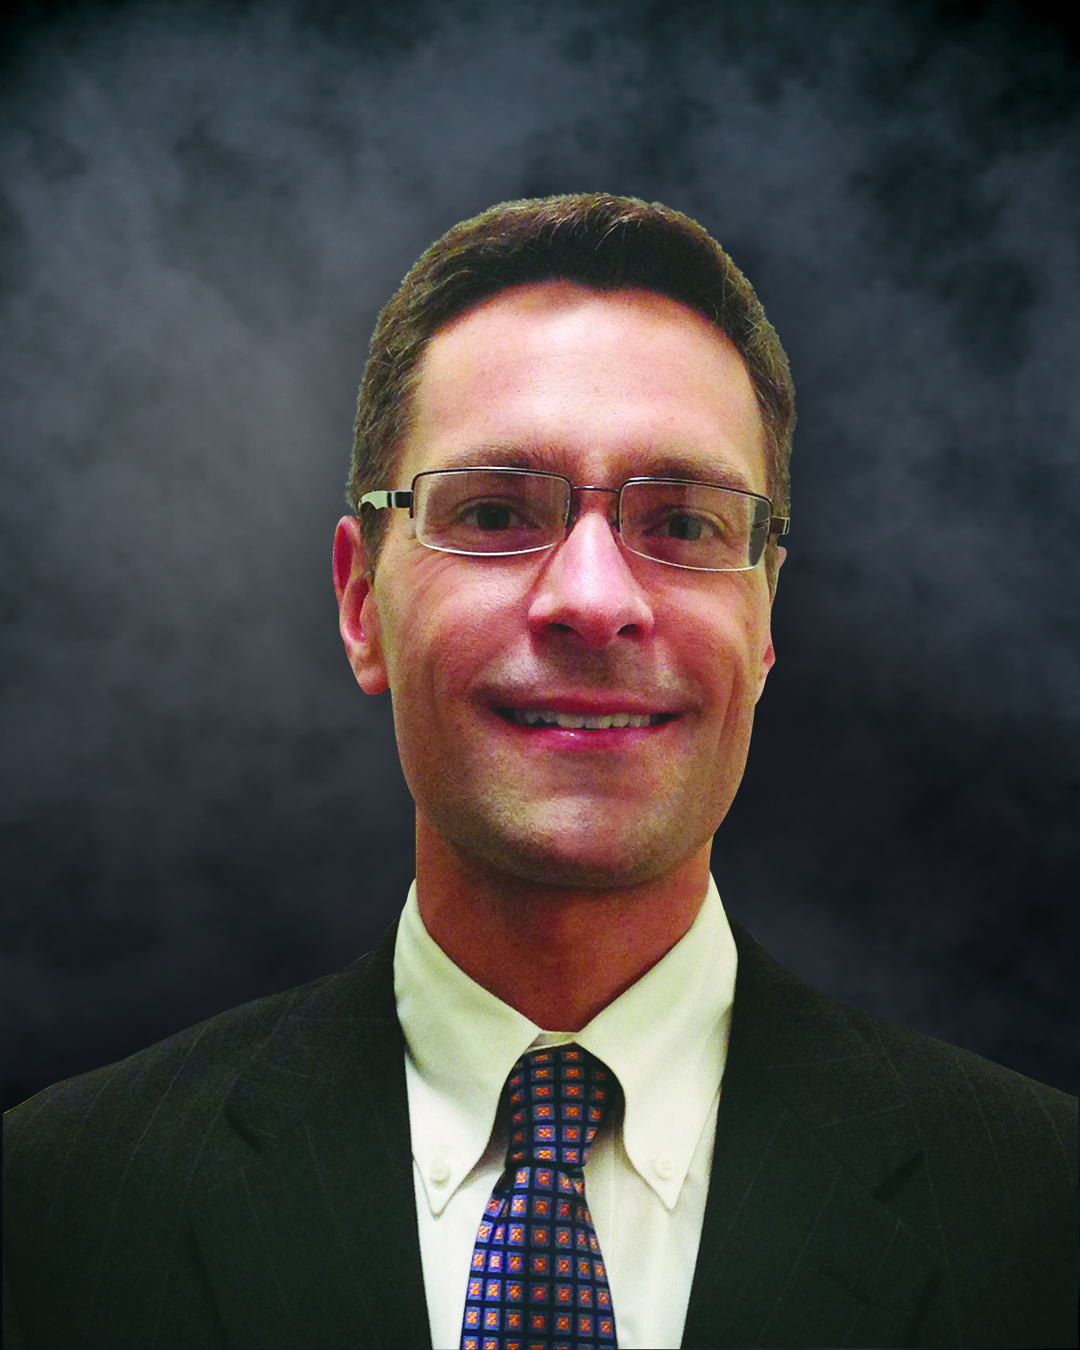 Kevin Dawson, recently promoted to Hayward Baker’s Area Manager for the Providence Office.